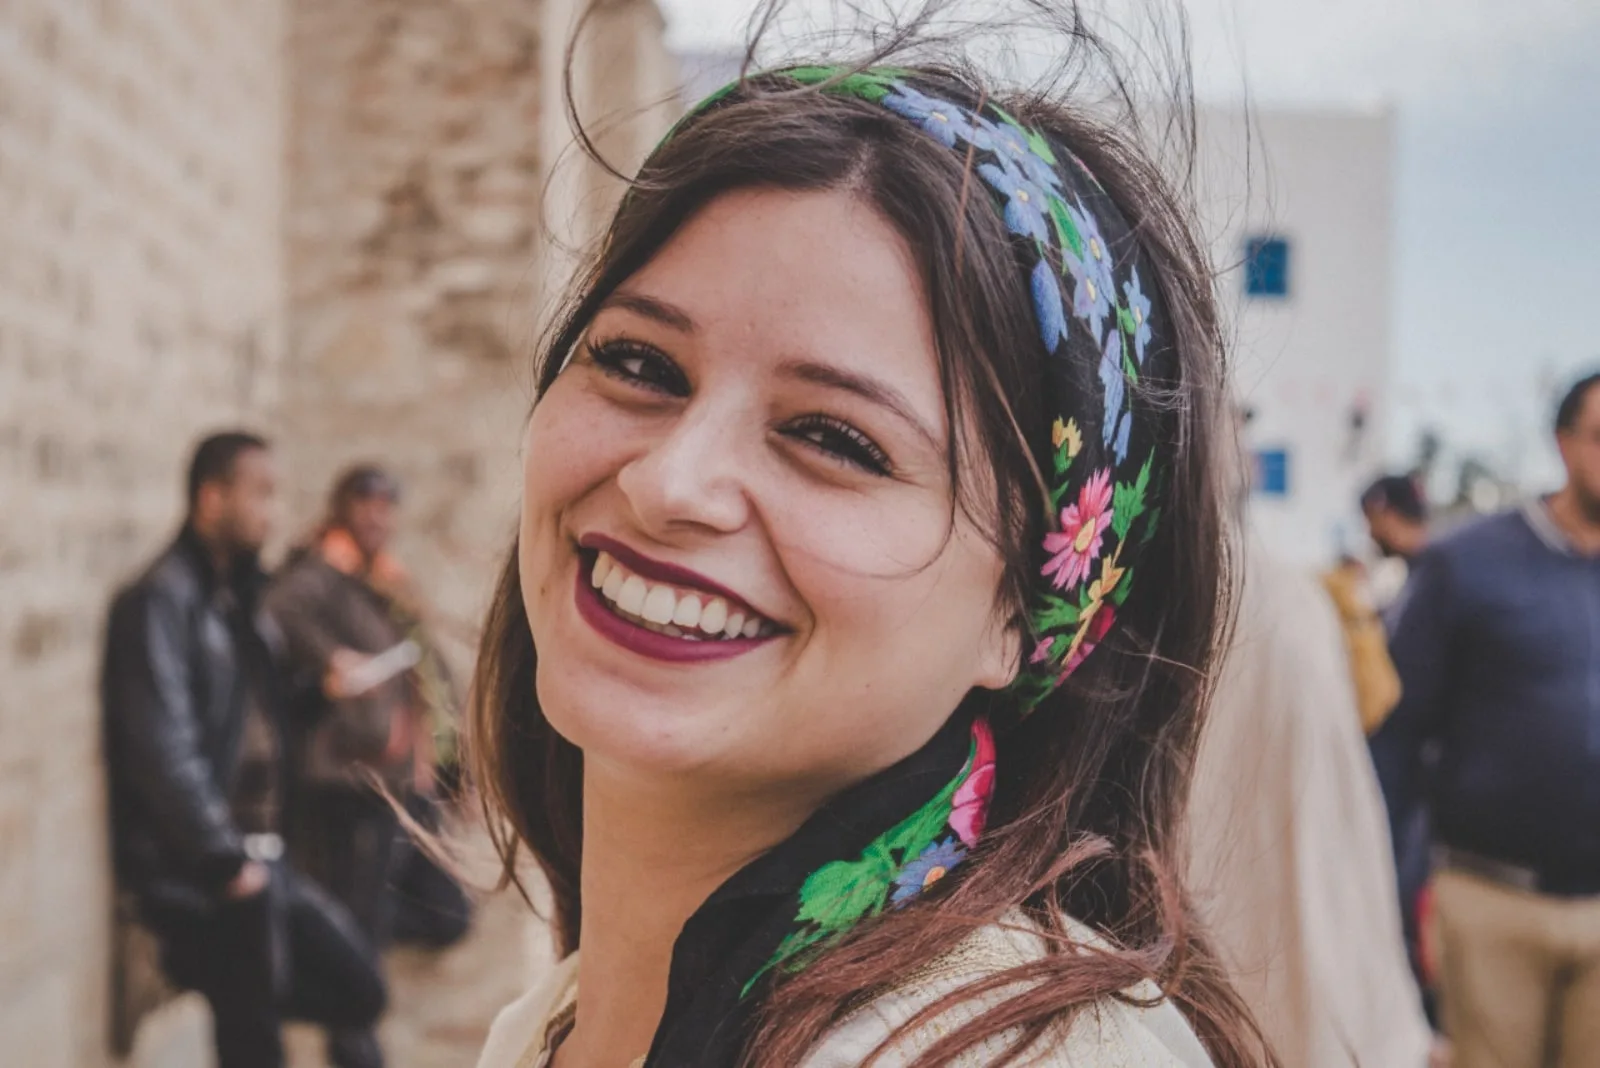 woman with colorful head scarf smiling